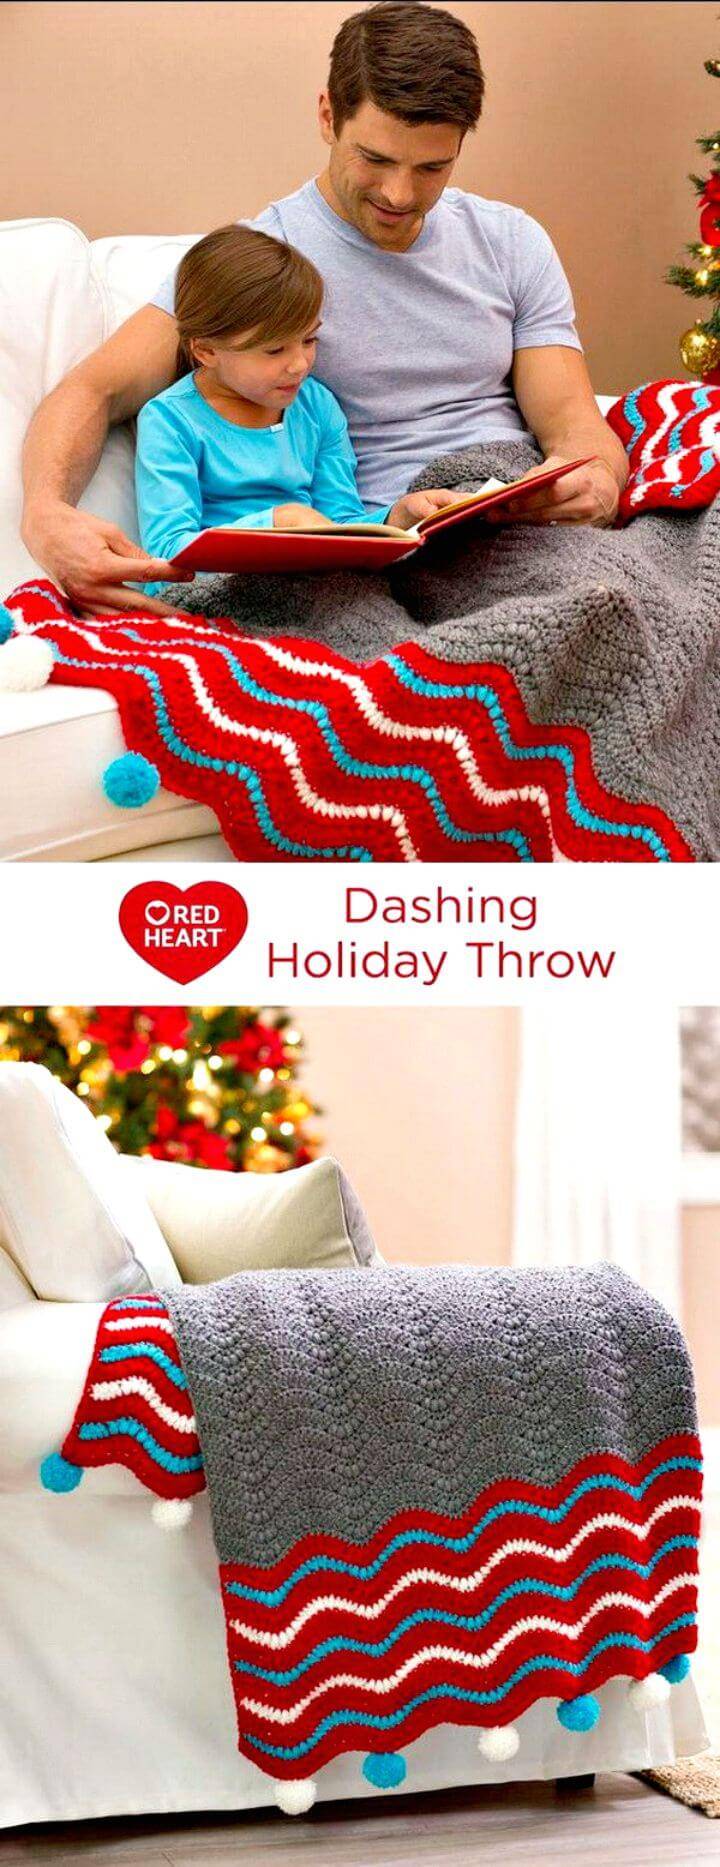 How To Crochet Dashing Holiday Throw Blanket - Free Pattern